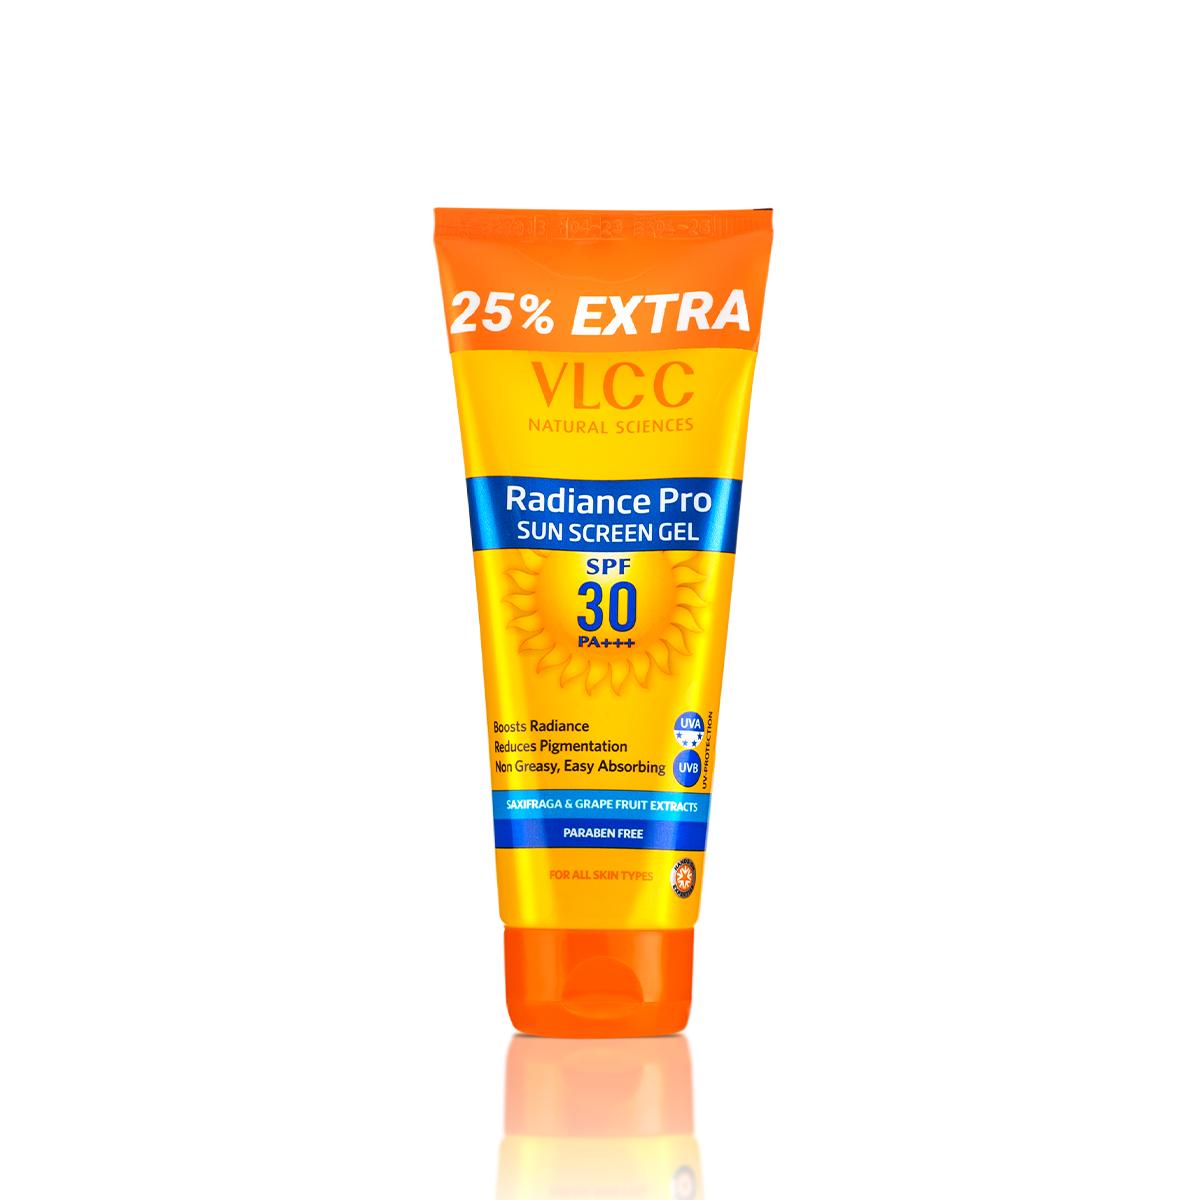 VLCC Radiance Pro SPF 30 PA+++ Sunscreen - Protect and Enhance Your Skin's Natural Radiance